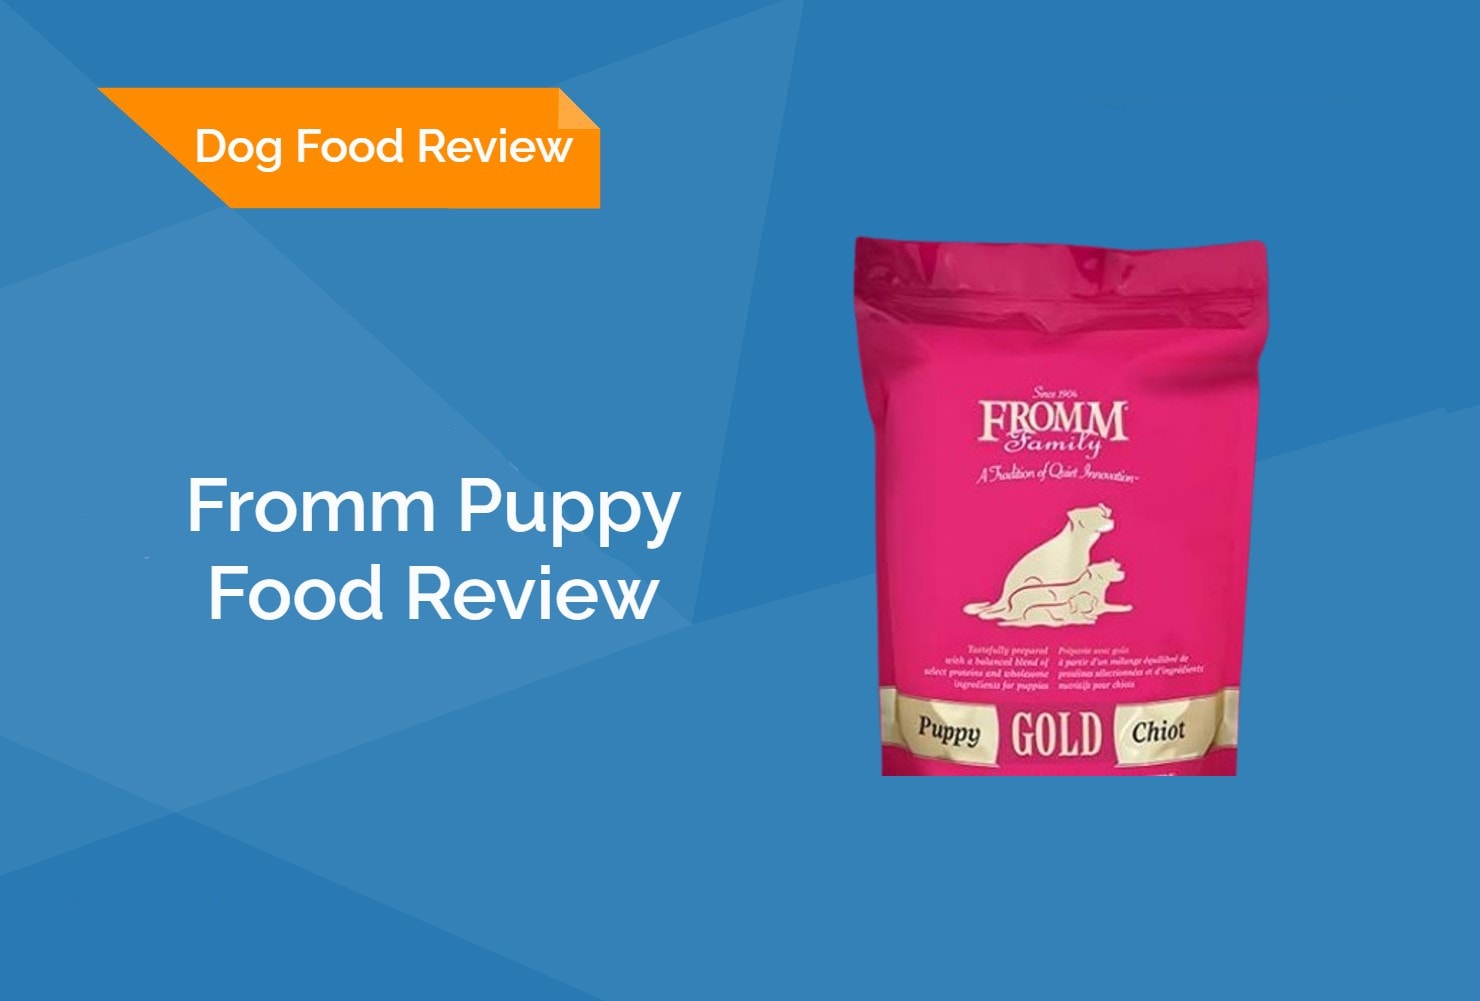 Fromm Puppy Food Review